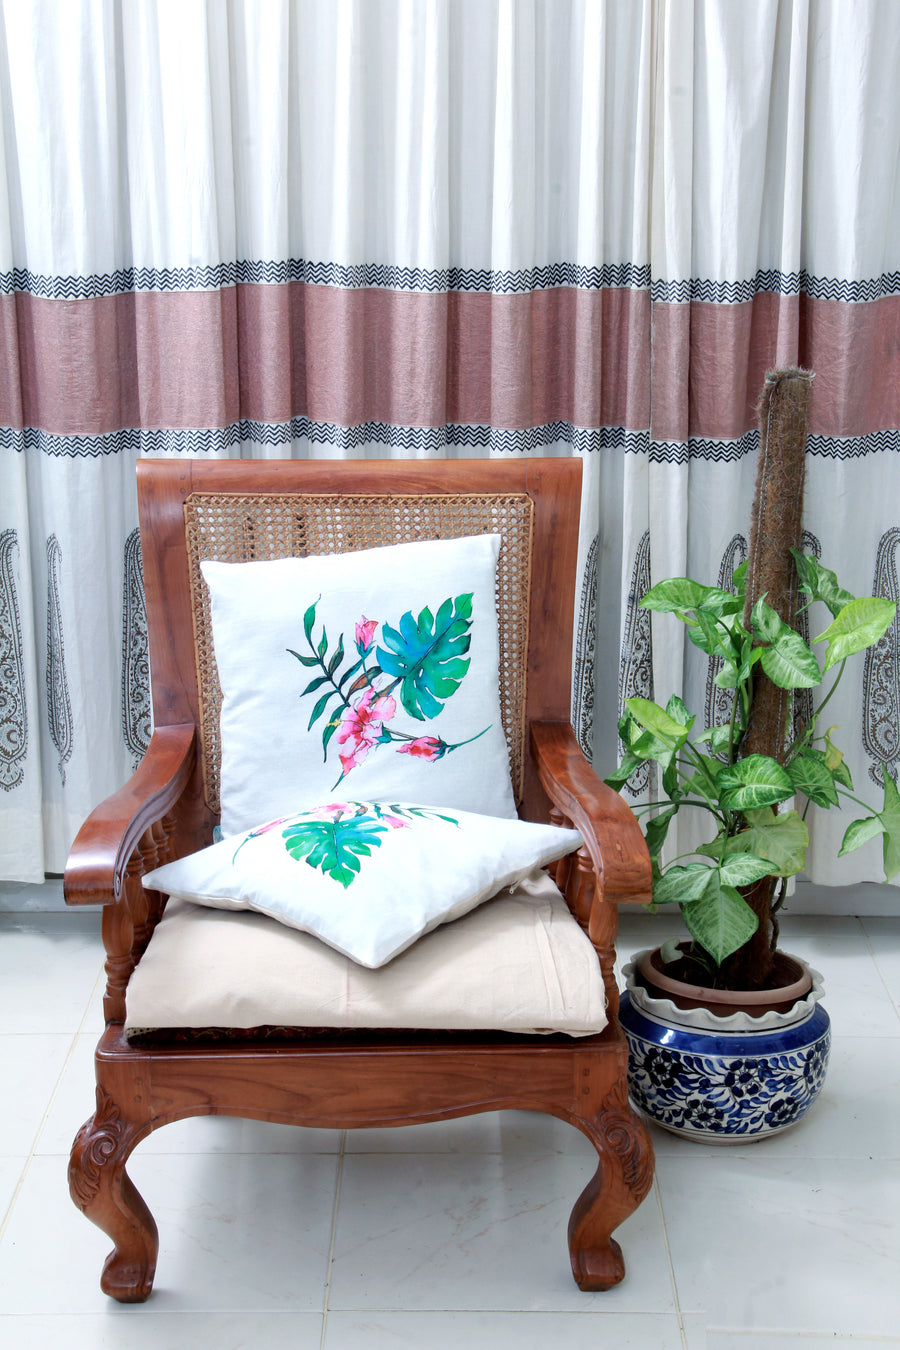 HIBISCUS PRINTED CUSION COVERS IN PURE COTTON